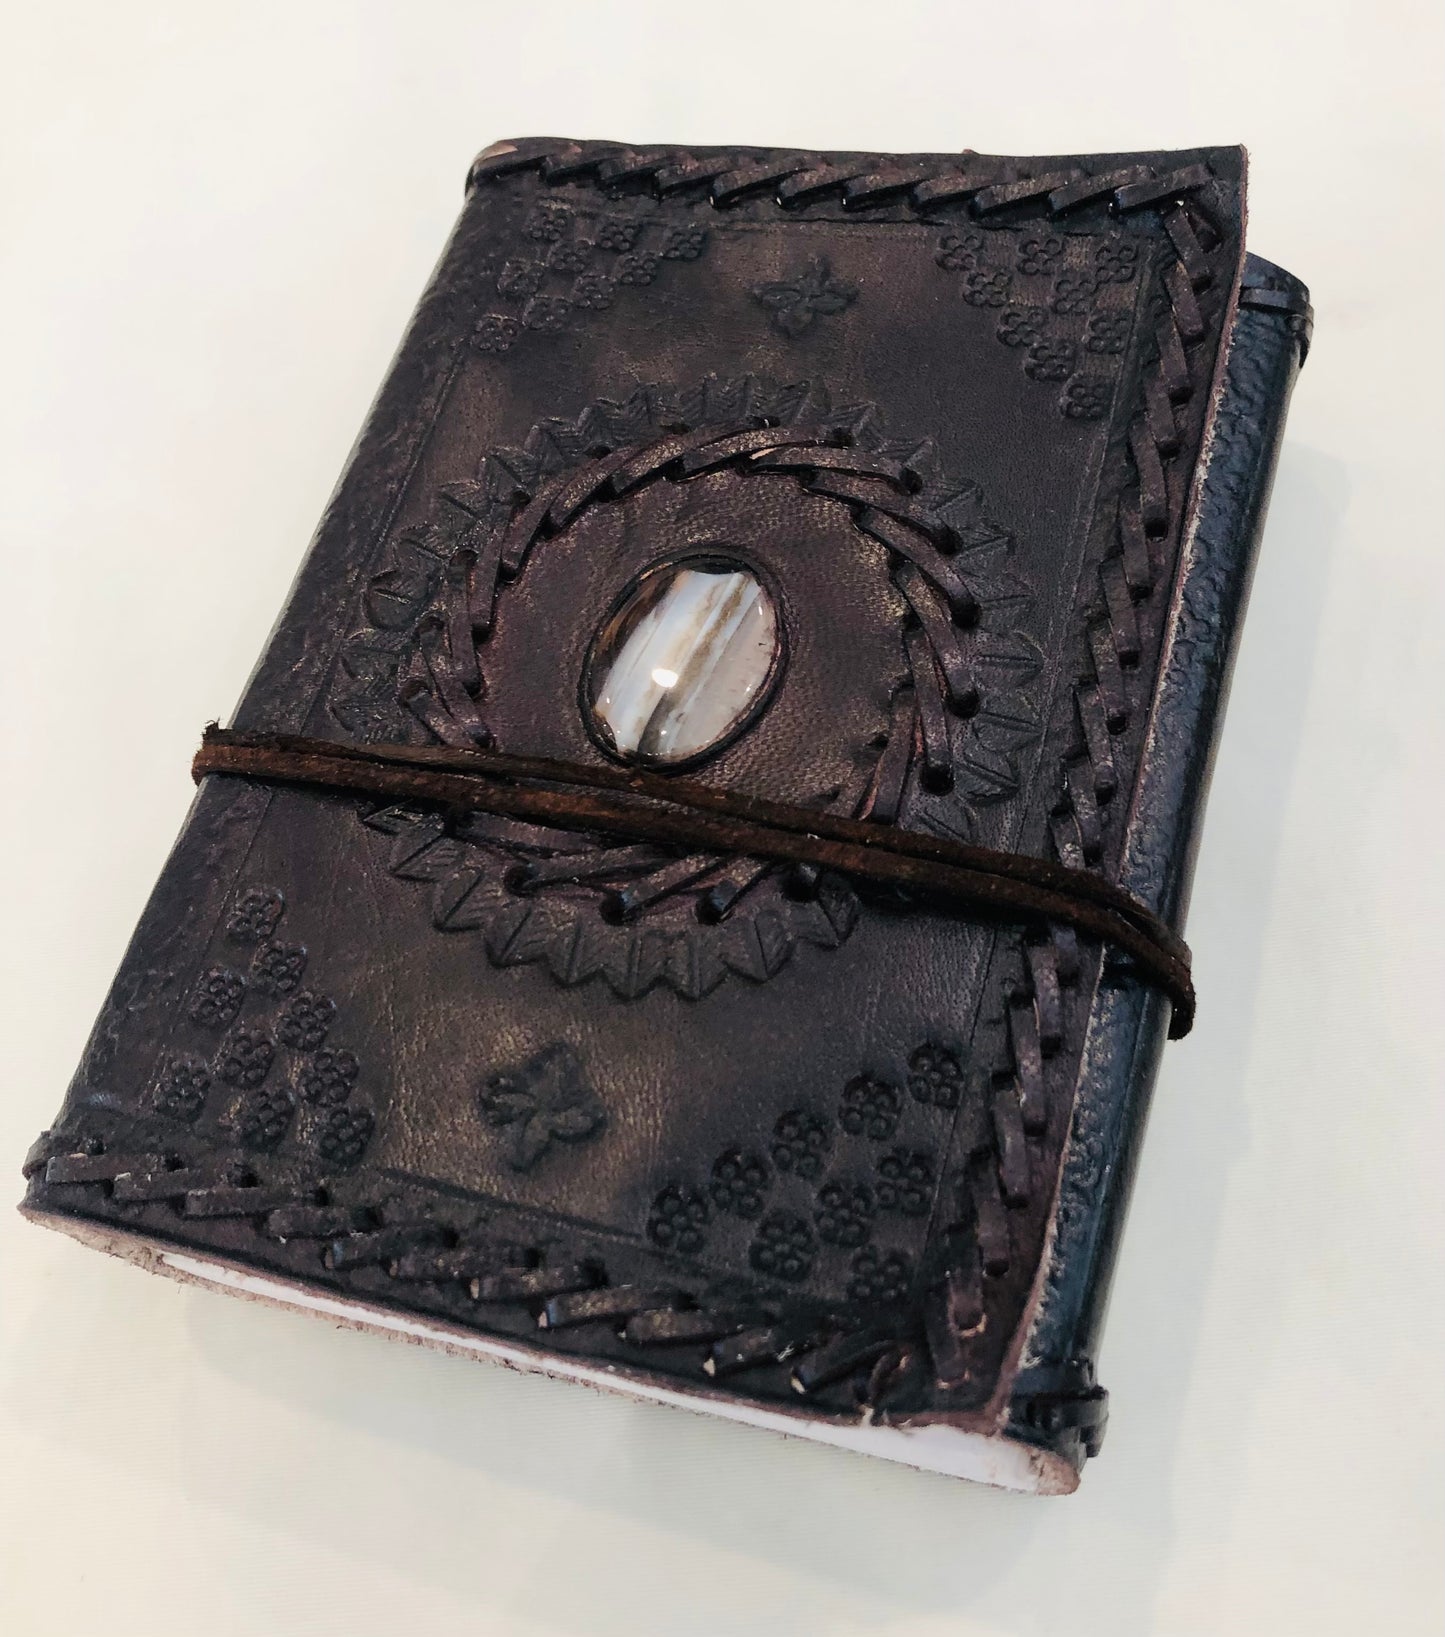 Handcrafted Stitched Leather Journal with Embossed Stone